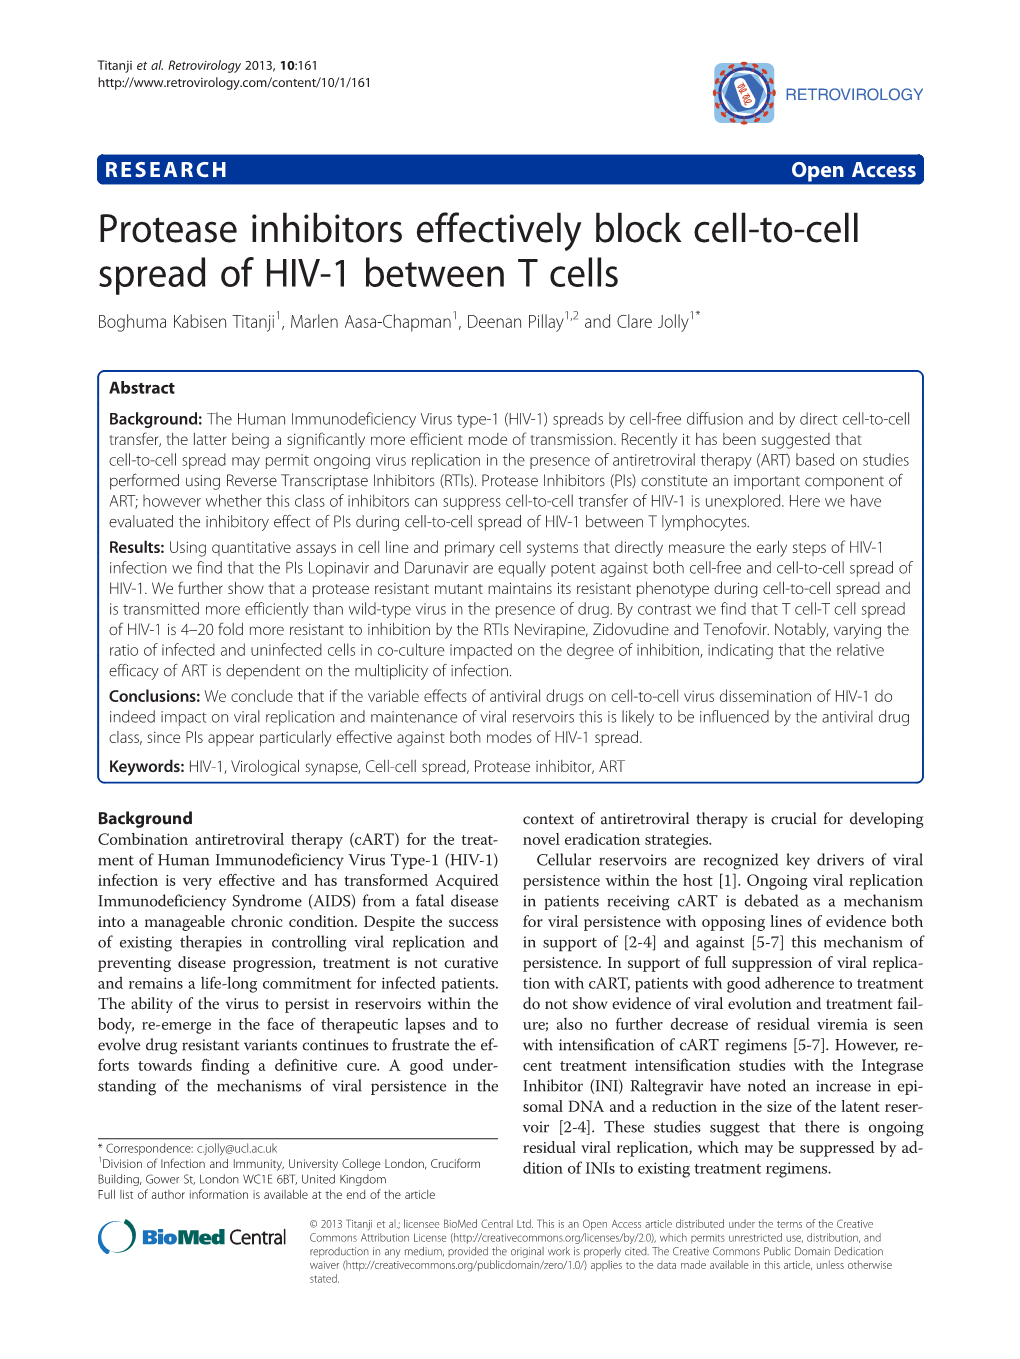 Protease Inhibitors Effectively Block Cell-To-Cell Spread of HIV-1 Between T Cells Boghuma Kabisen Titanji1, Marlen Aasa-Chapman1, Deenan Pillay1,2 and Clare Jolly1*